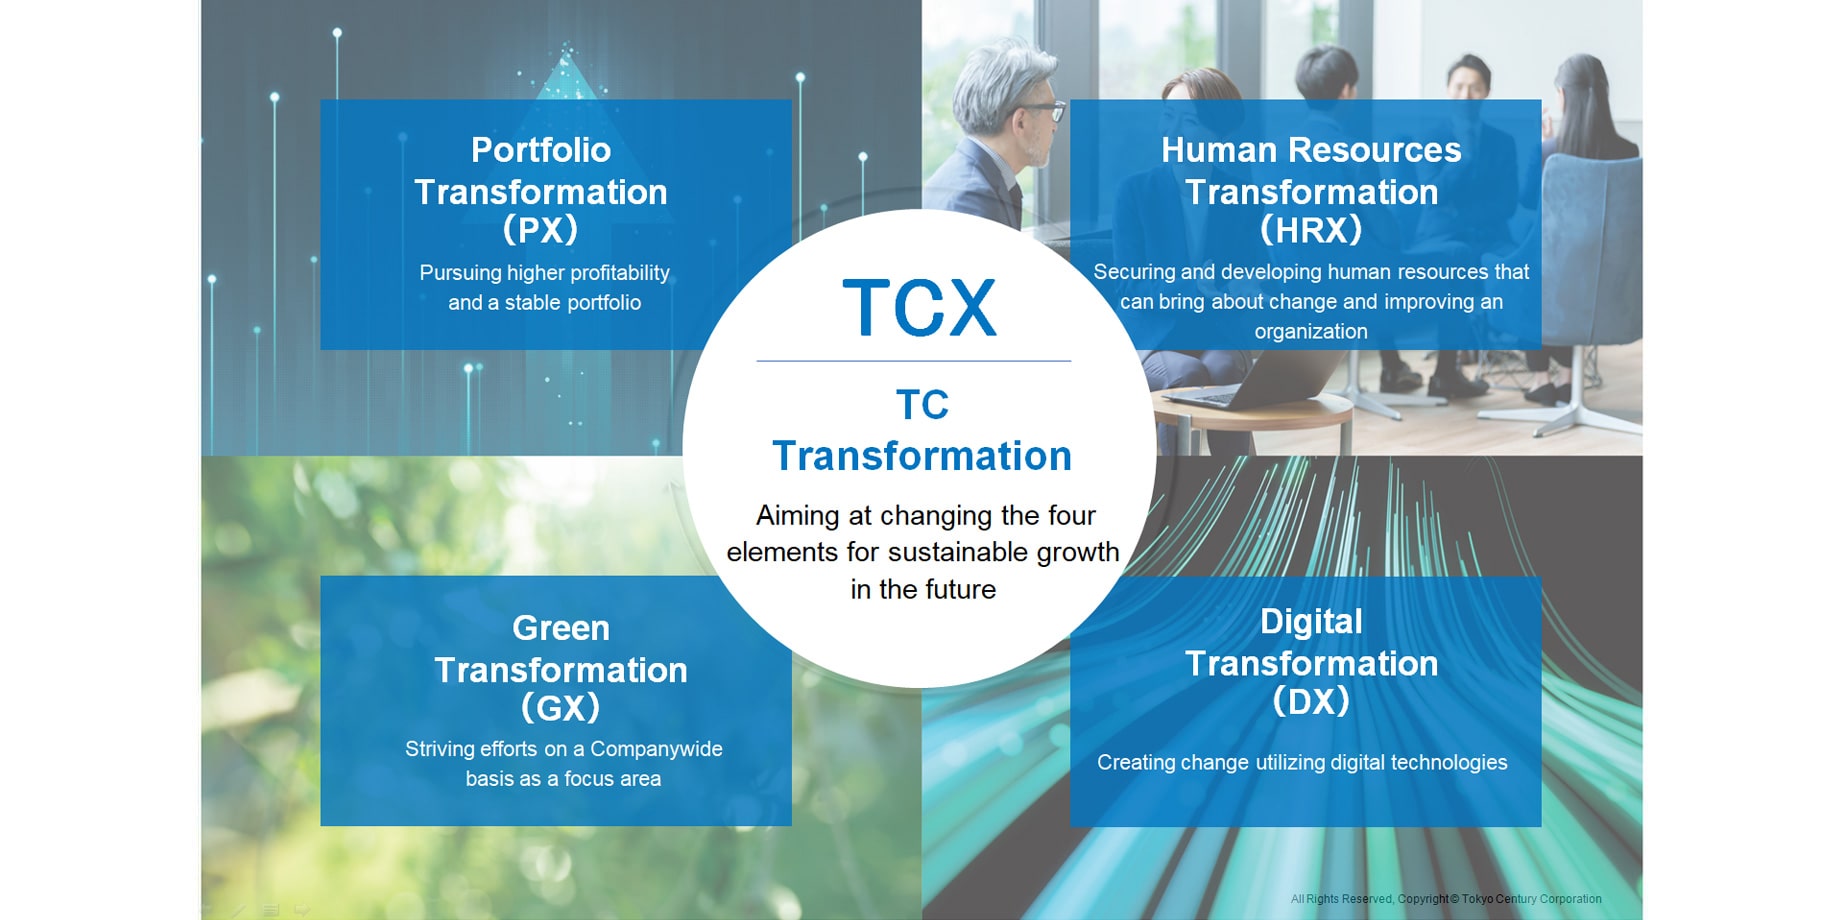 HRX is one of the four elements of TC Transformation, for securing and developing human resources that will bring about change and improve an organization.